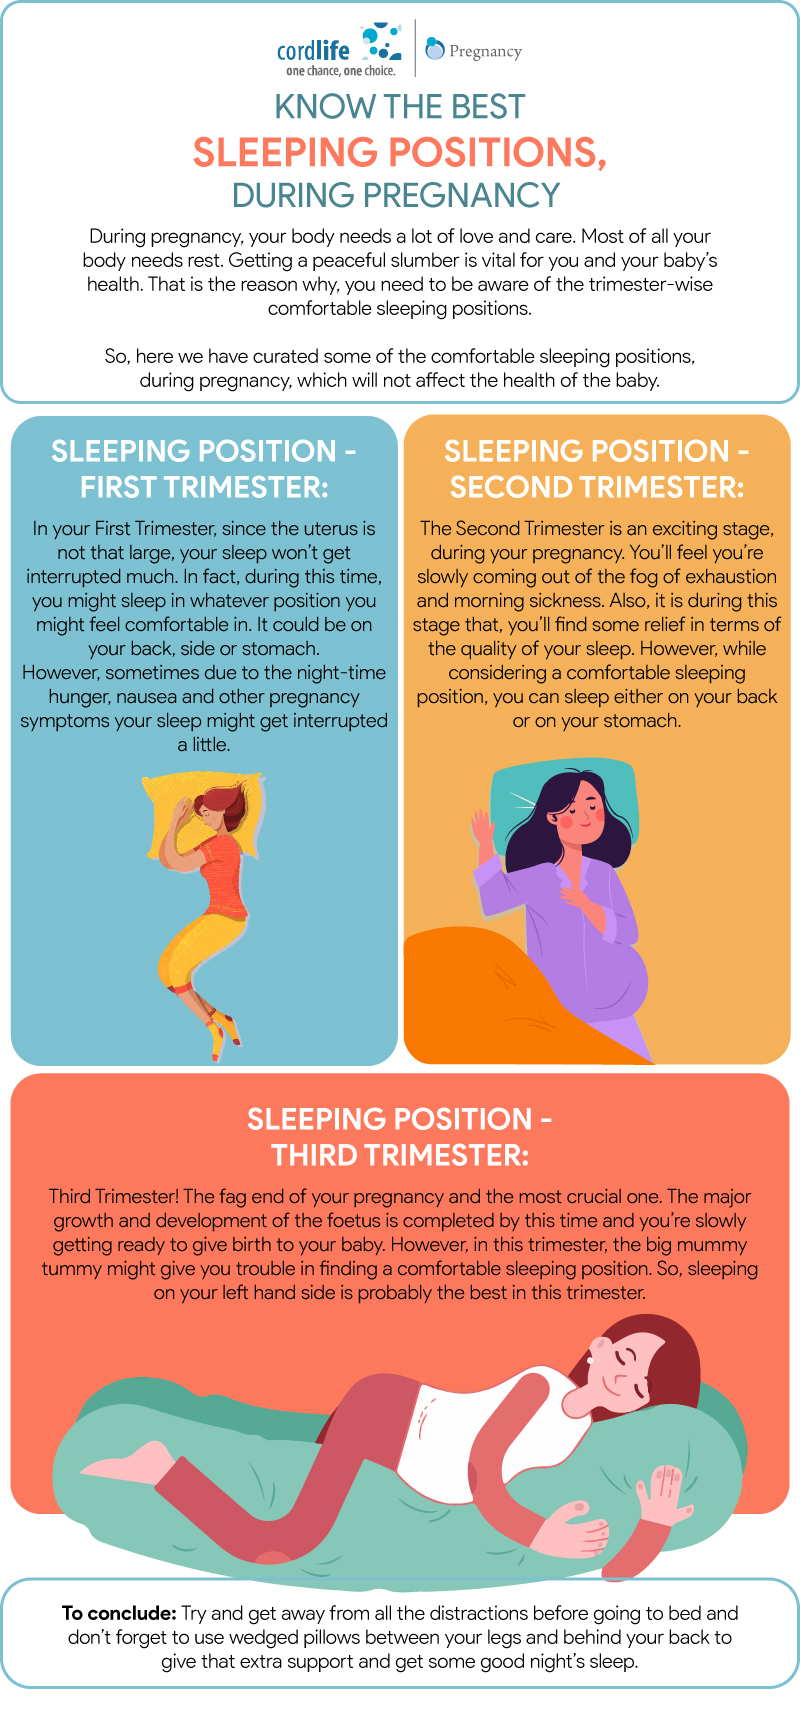 https://www.cordlifeindia.com/images/infographics/Know-the-Best-Sleeping-Positions-During-Pregnancy.jpg